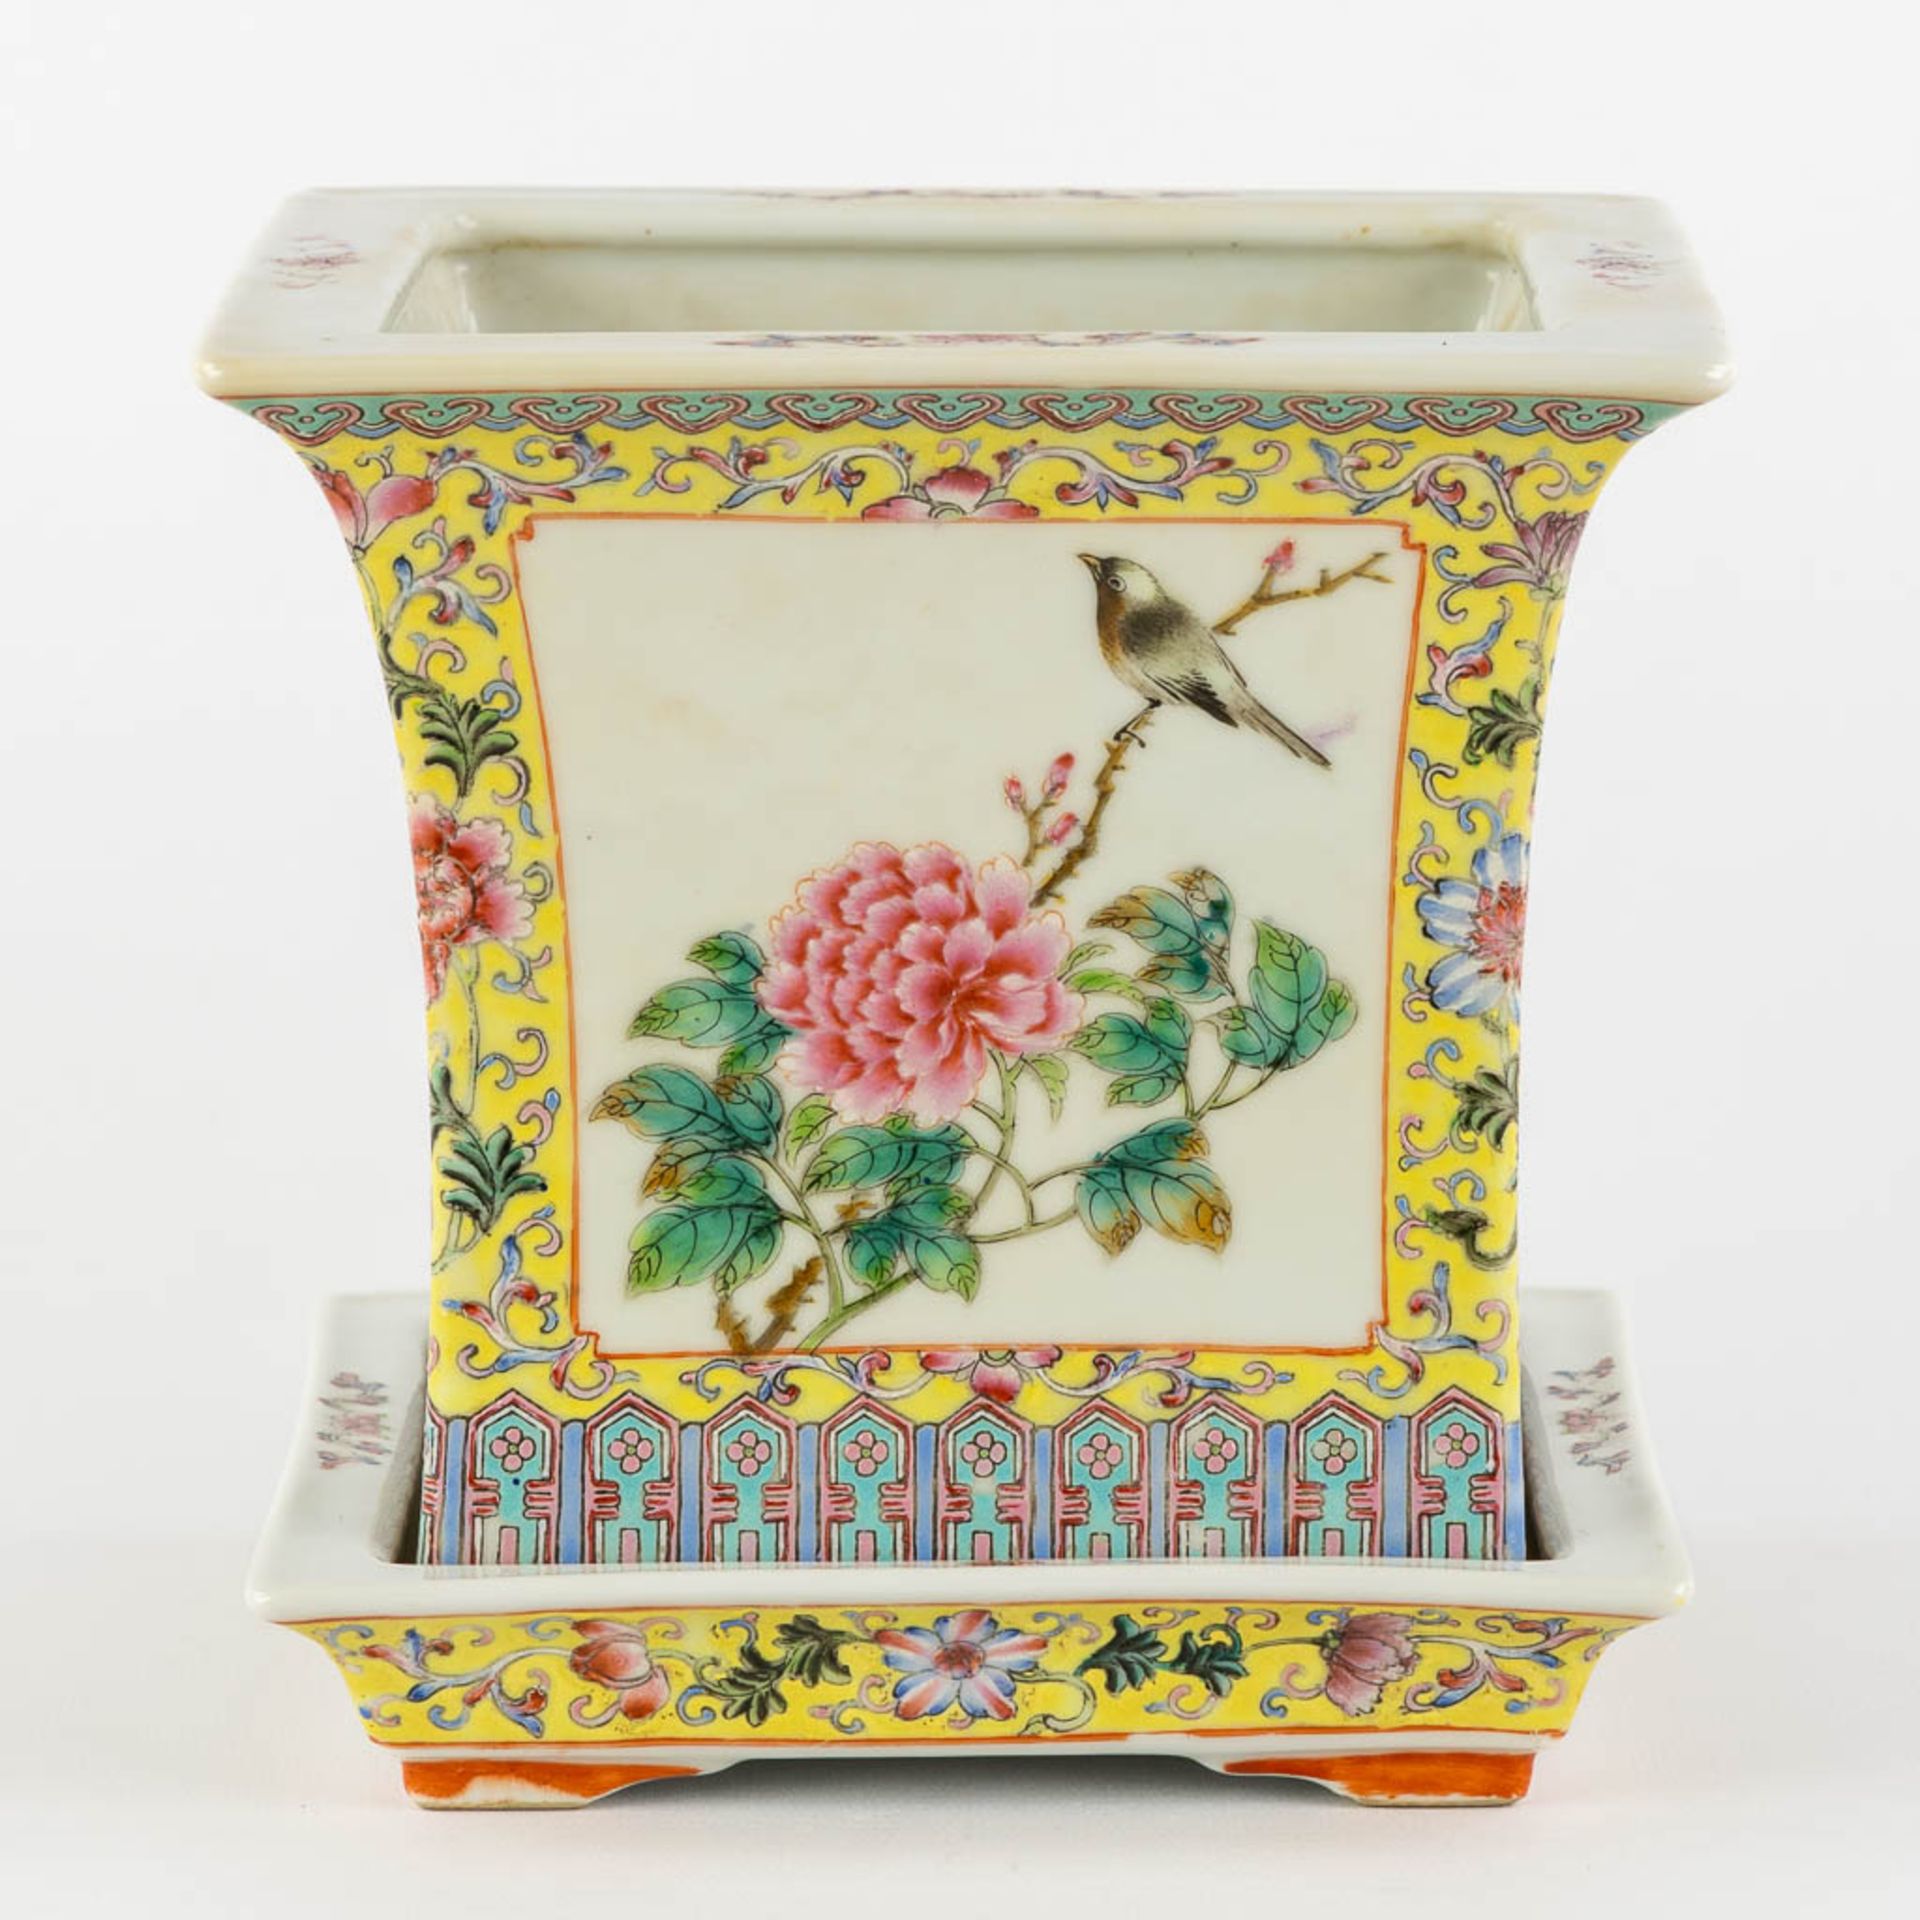 A Chinese Cache Pot, Famille Rose decorated with fauna and flora. (L:18 x W:18 x H:17,5 cm) - Image 5 of 13